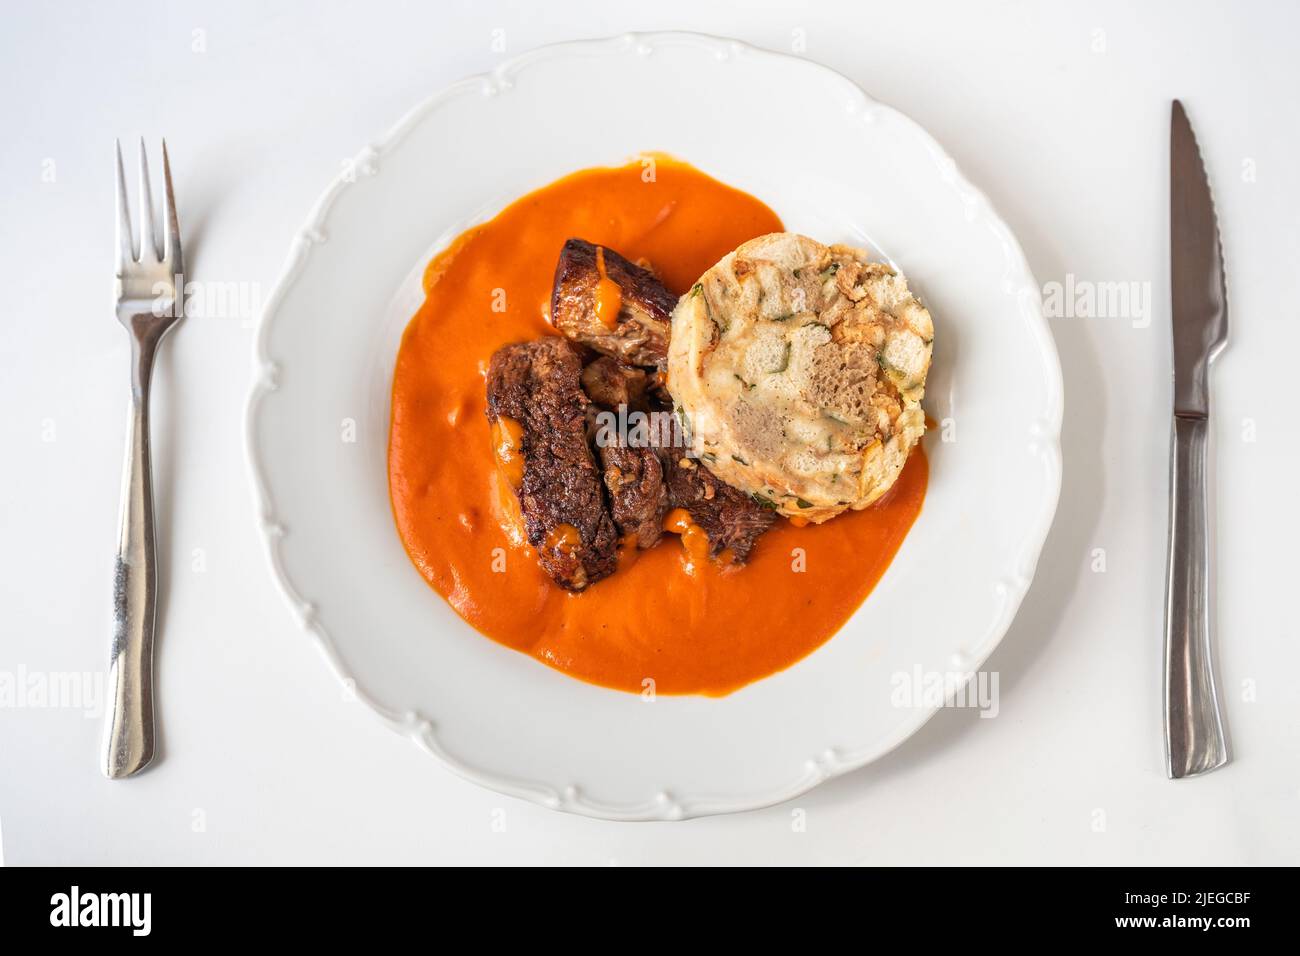 Tomato sauce, beef and dumpling in white plate, cutlery on white background. This meal is traditional and favourite in Czech republic. Stock Photo